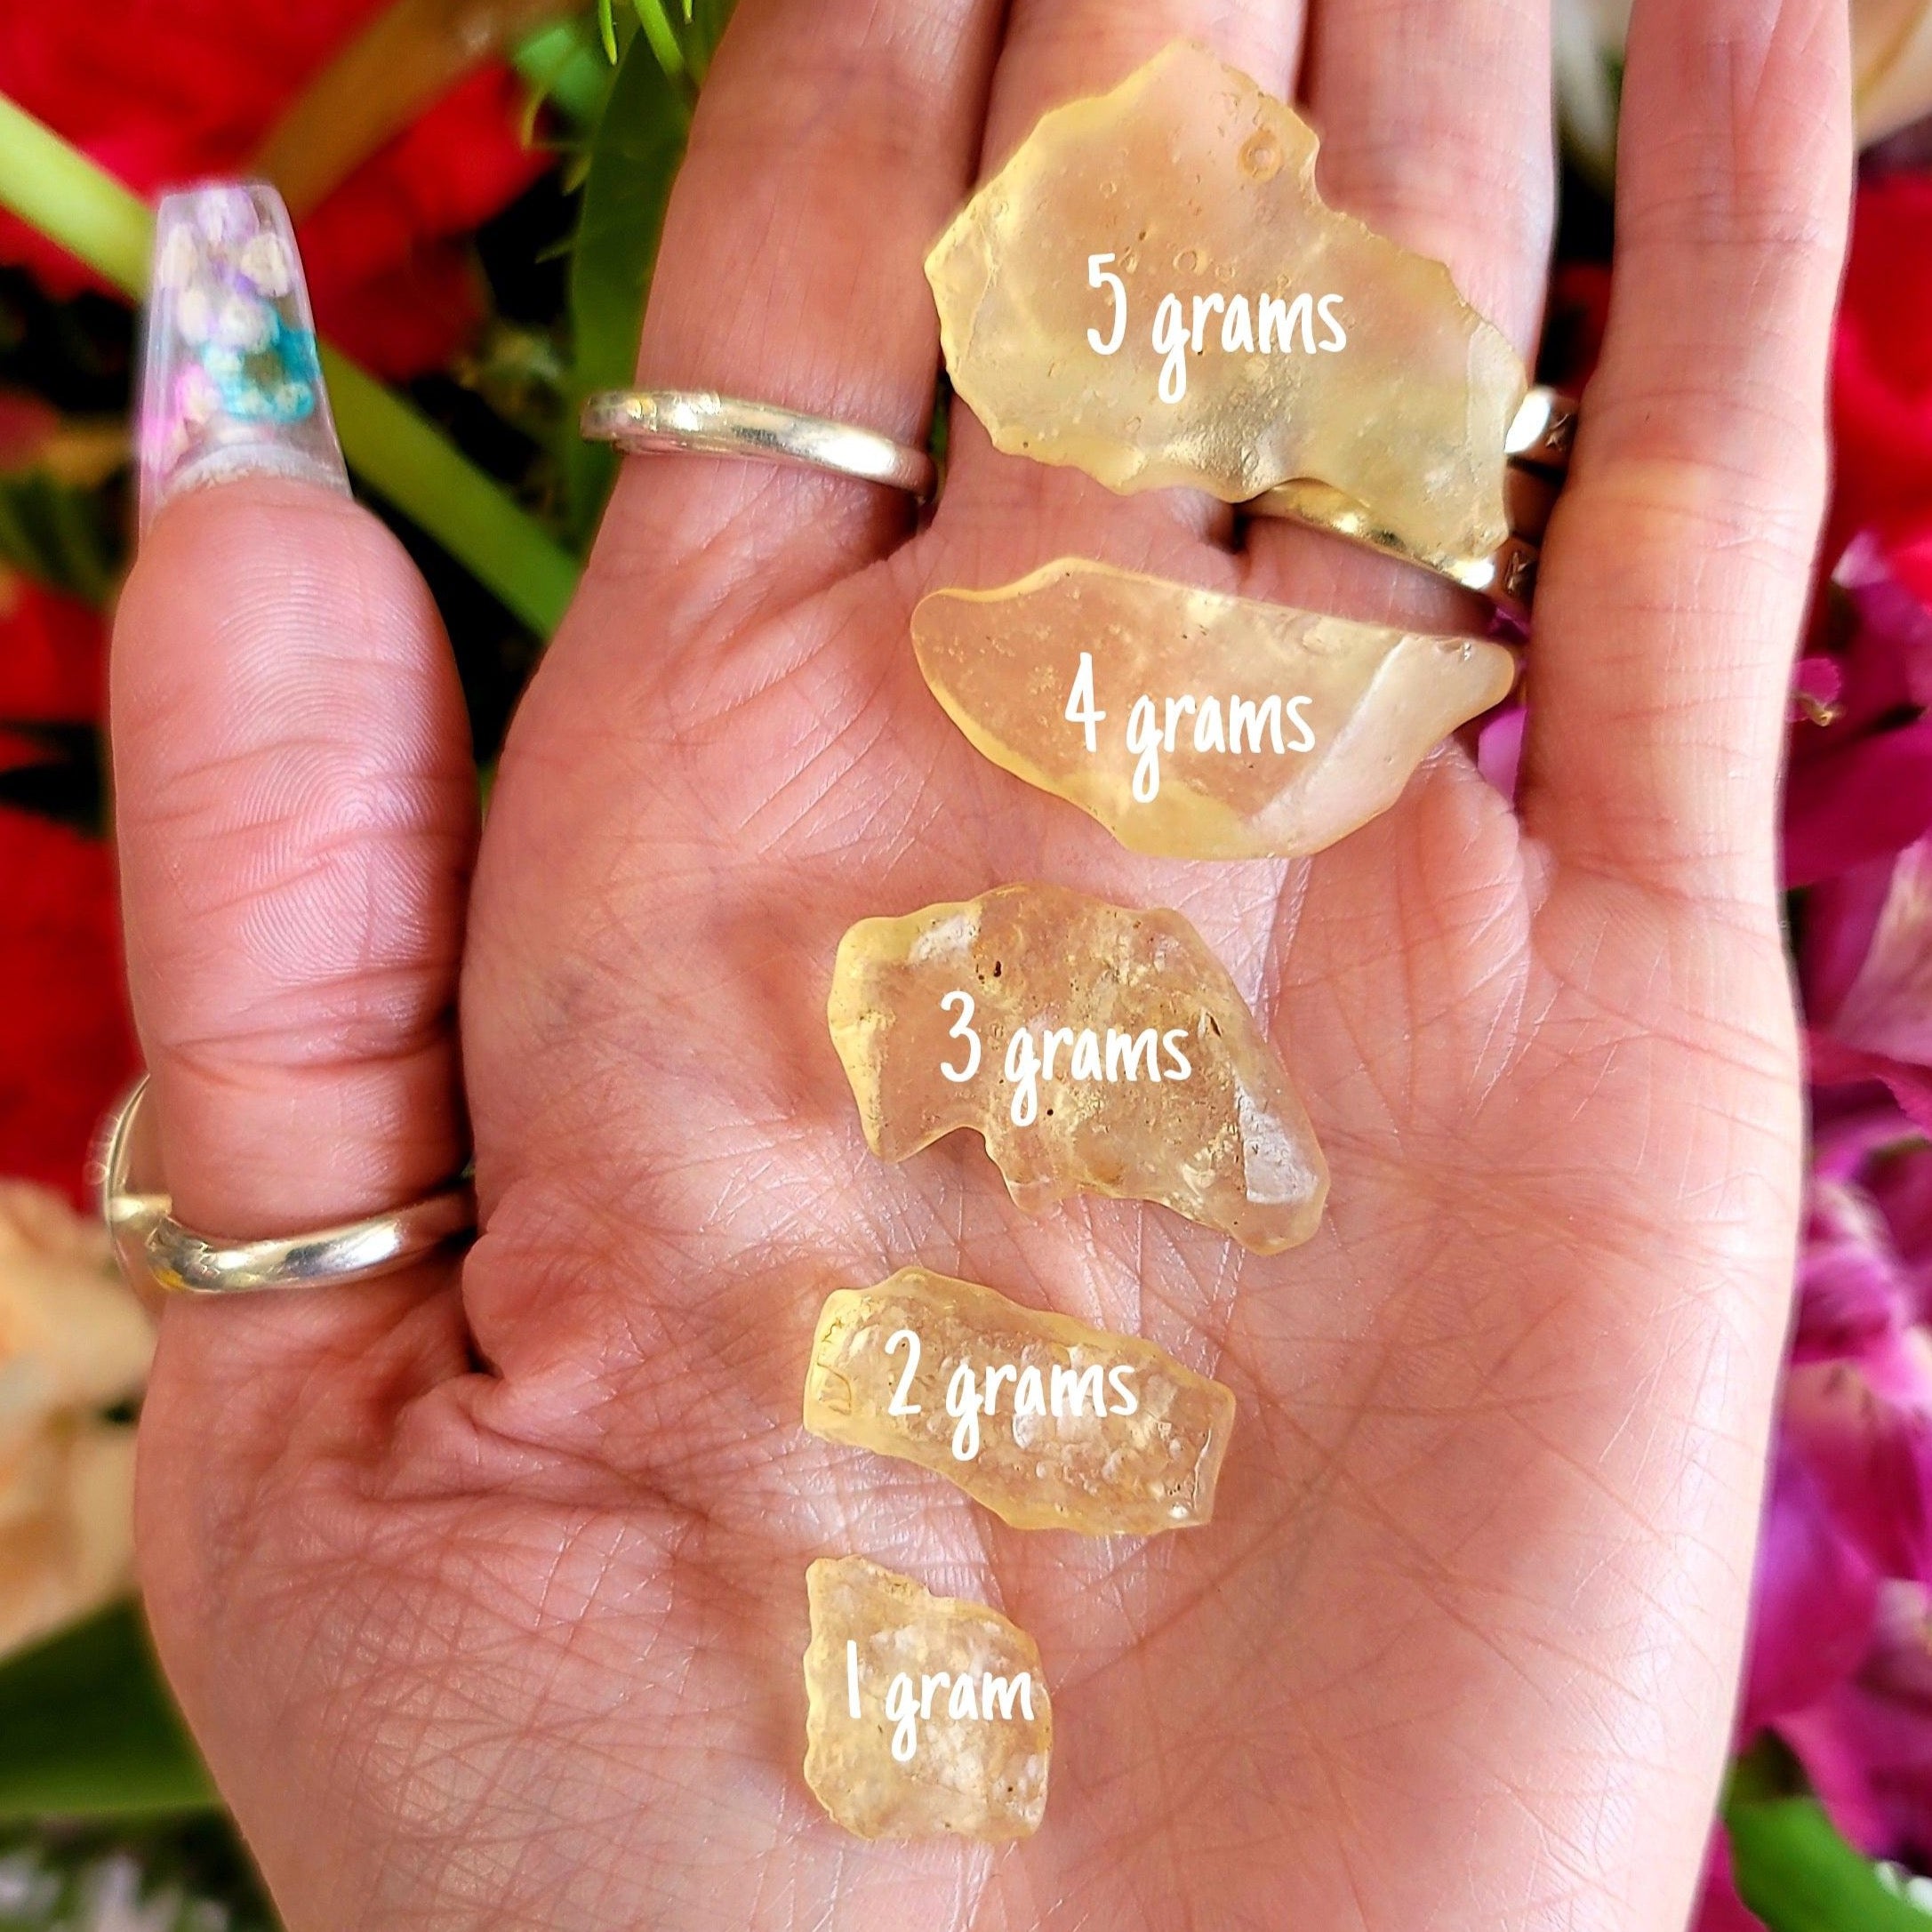 Libyan Desert Glass Tektite for Confidence, Manifesting, Personal Power & Protection *Intuitively Selected*